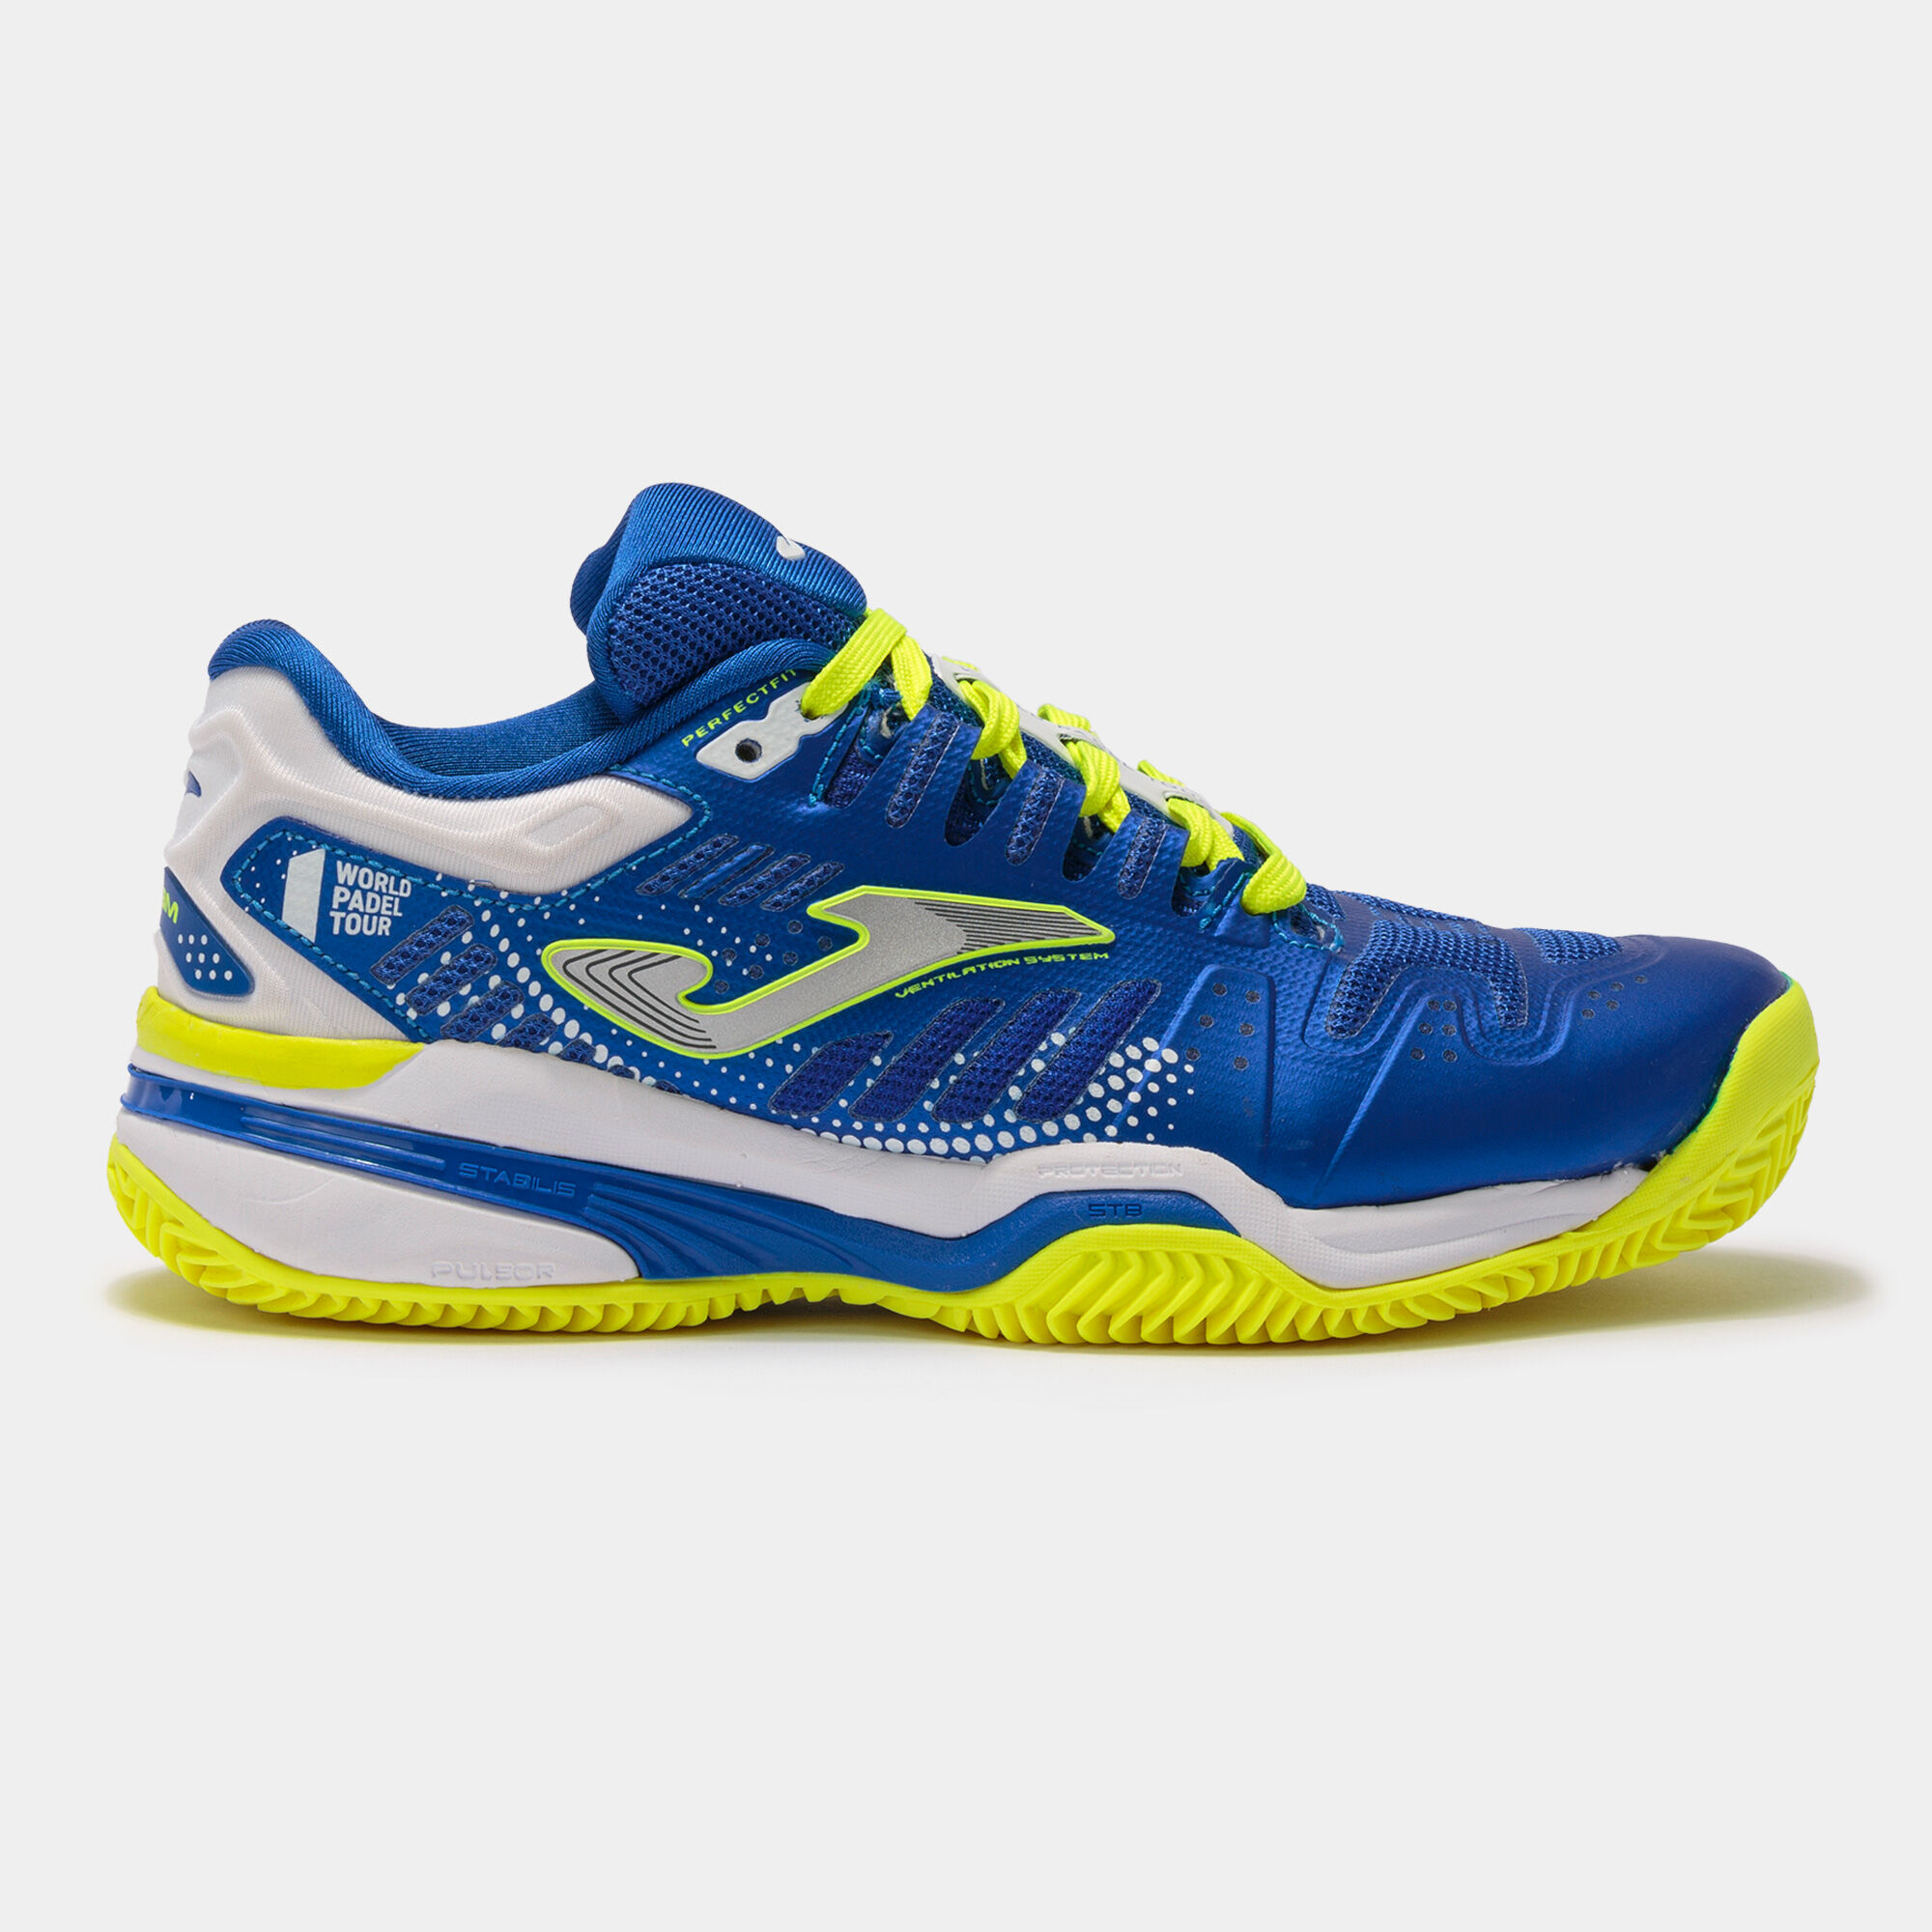 SHOES SLAM 22 CLAY JUNIOR ROYAL BLUE FLUORESCENT YELLOW